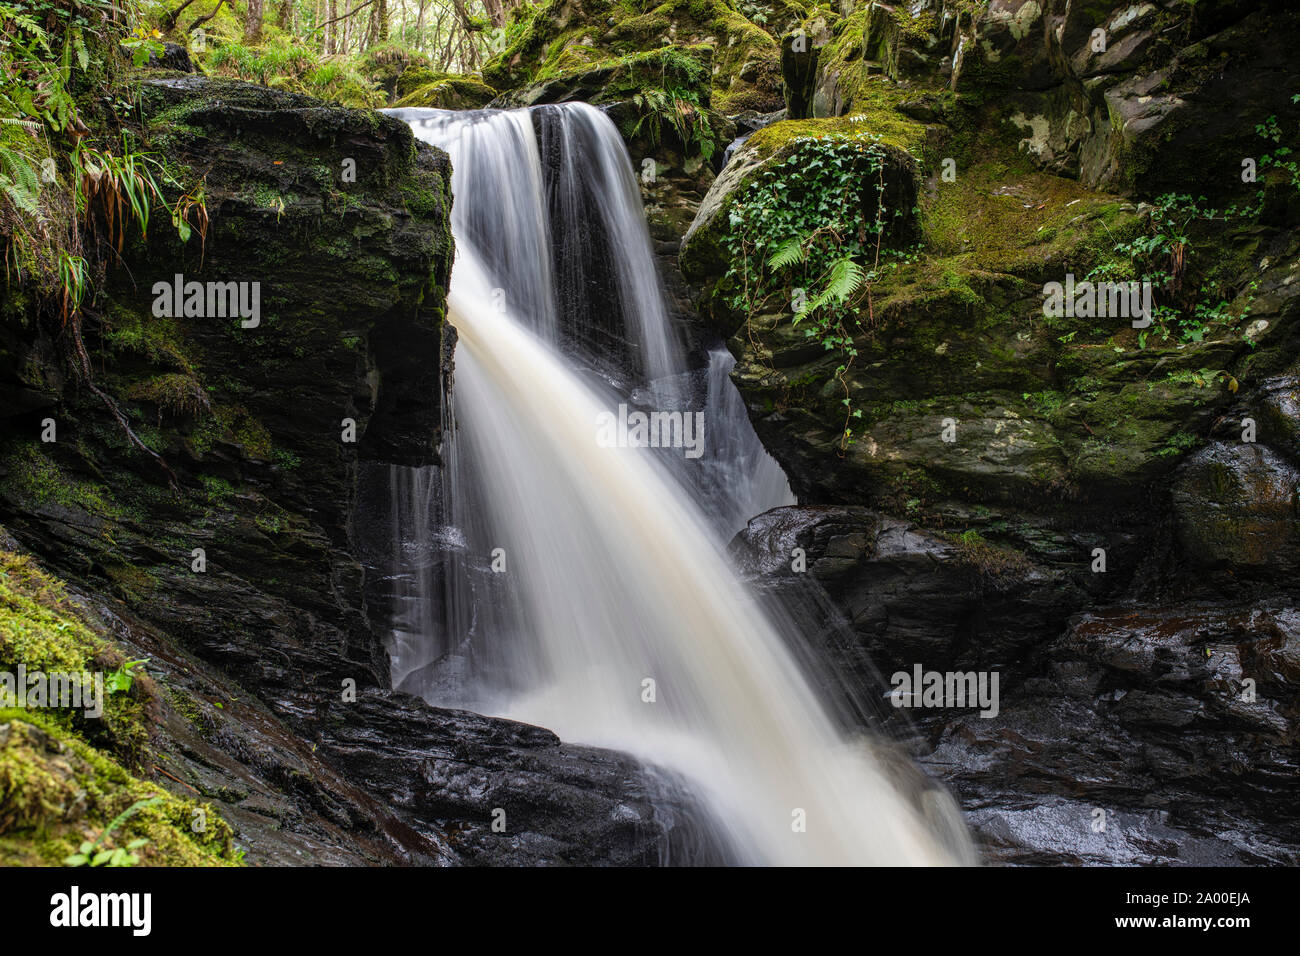 Cordorcan burn waterfalls in the Wood Of Cree Nature Reserve, Newton Stewart, Dumfries and Galloway, Scotland Stock Photo